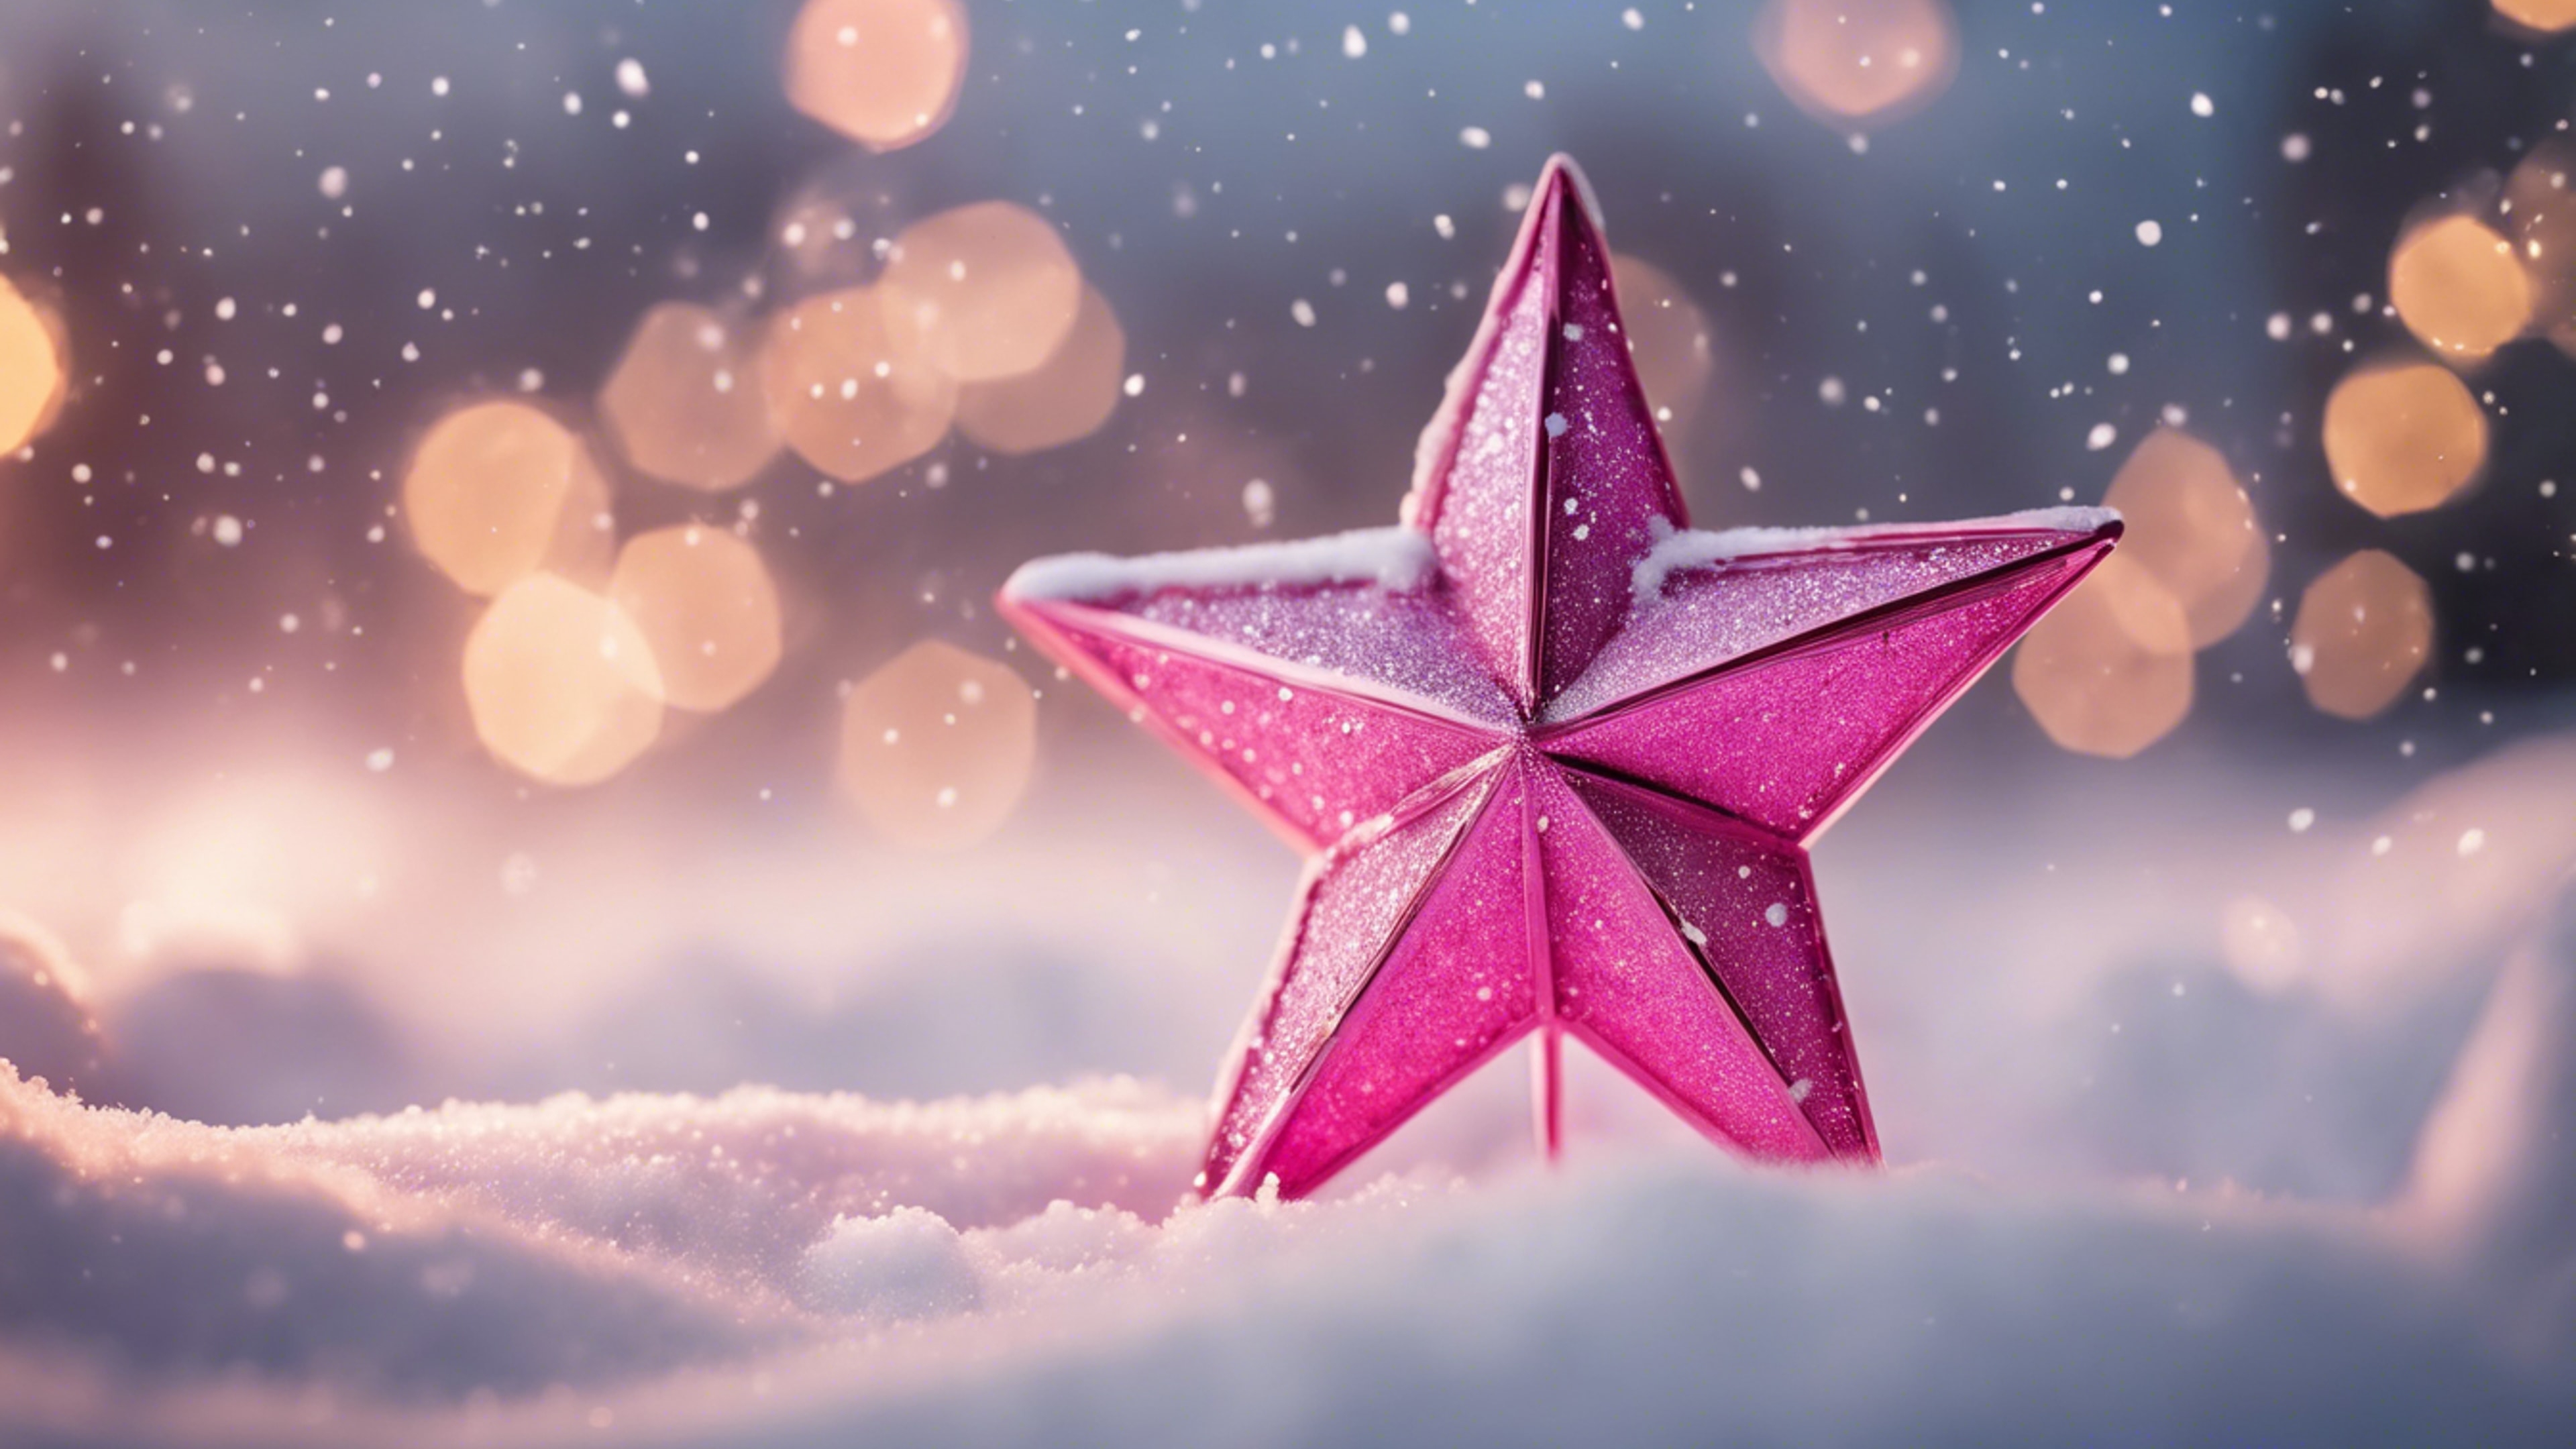 A brightly lit pink Christmas star against the backdrop of a snow-filled sky. ផ្ទាំង​រូបភាព[528d0c7ac72f41809e7e]